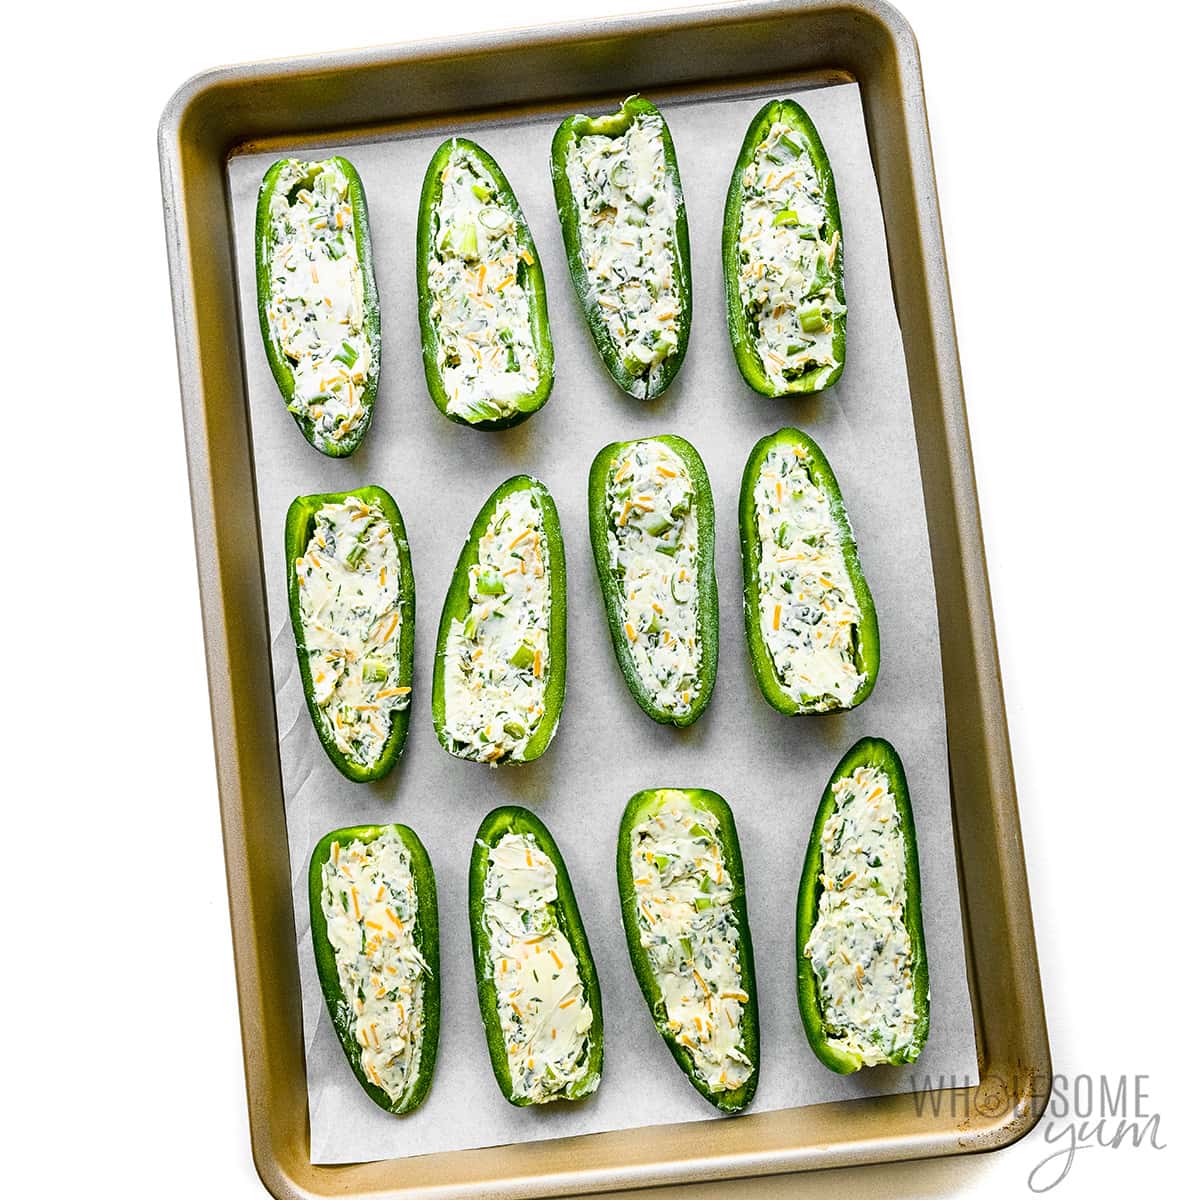 Jalapeno halves filled with cheese mixture.